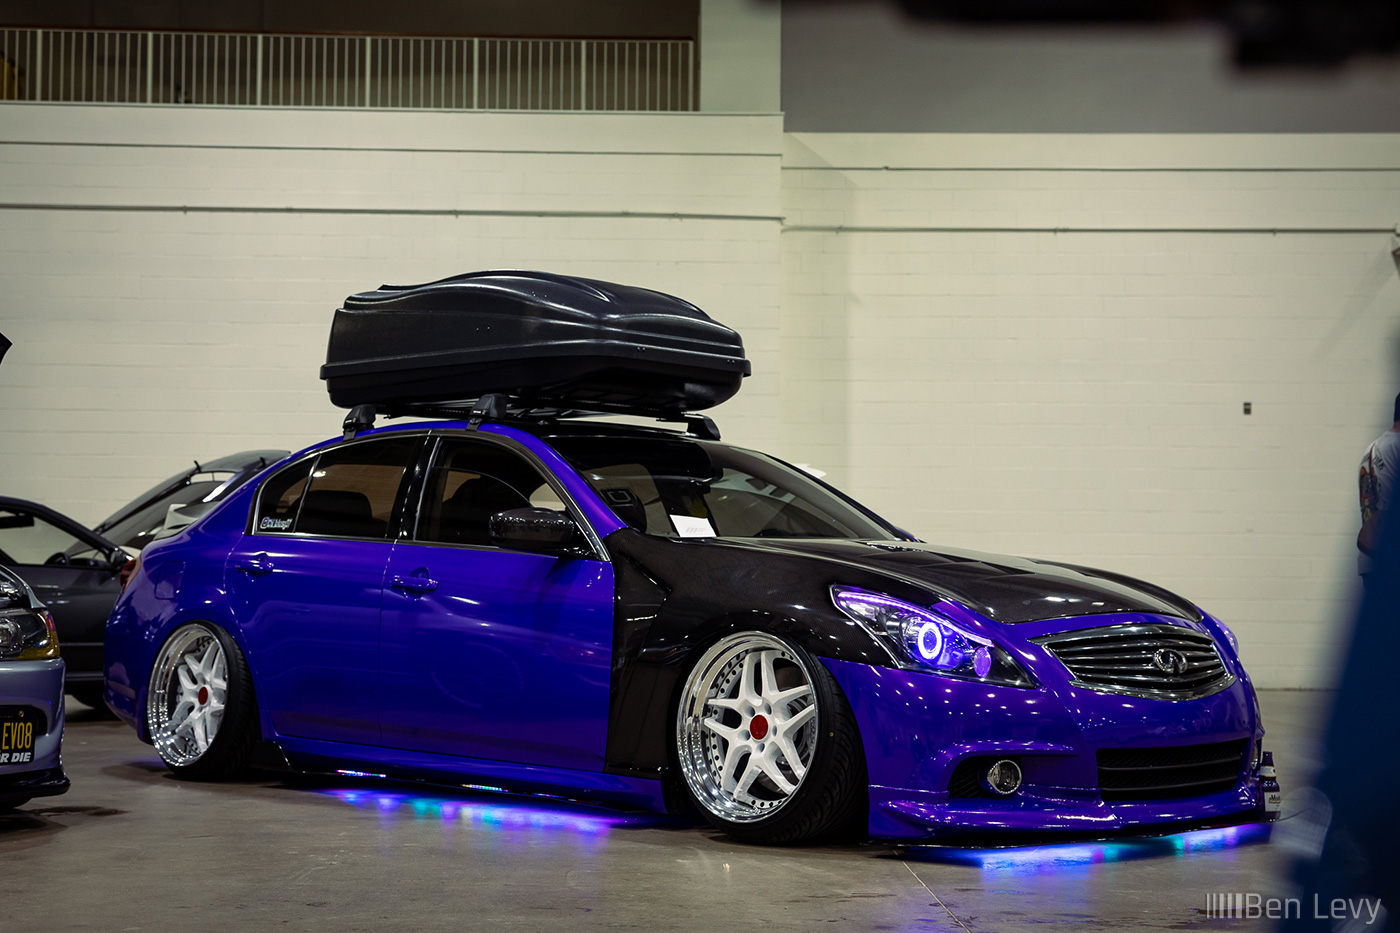 Bagged Infiniti G37 with Roof Cargo Carrier